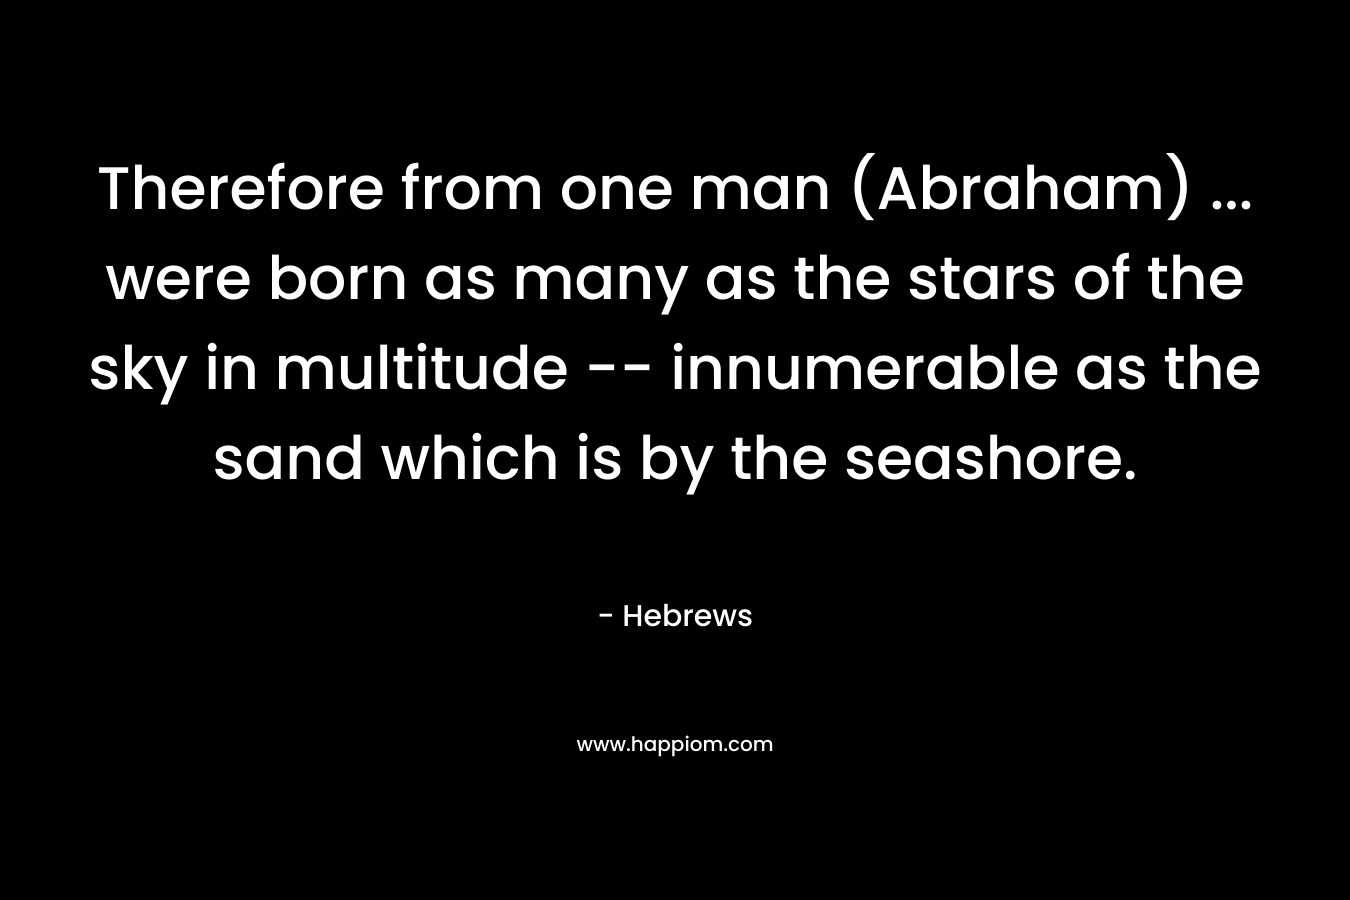 Therefore from one man (Abraham) … were born as many as the stars of the sky in multitude — innumerable as the sand which is by the seashore. – Hebrews